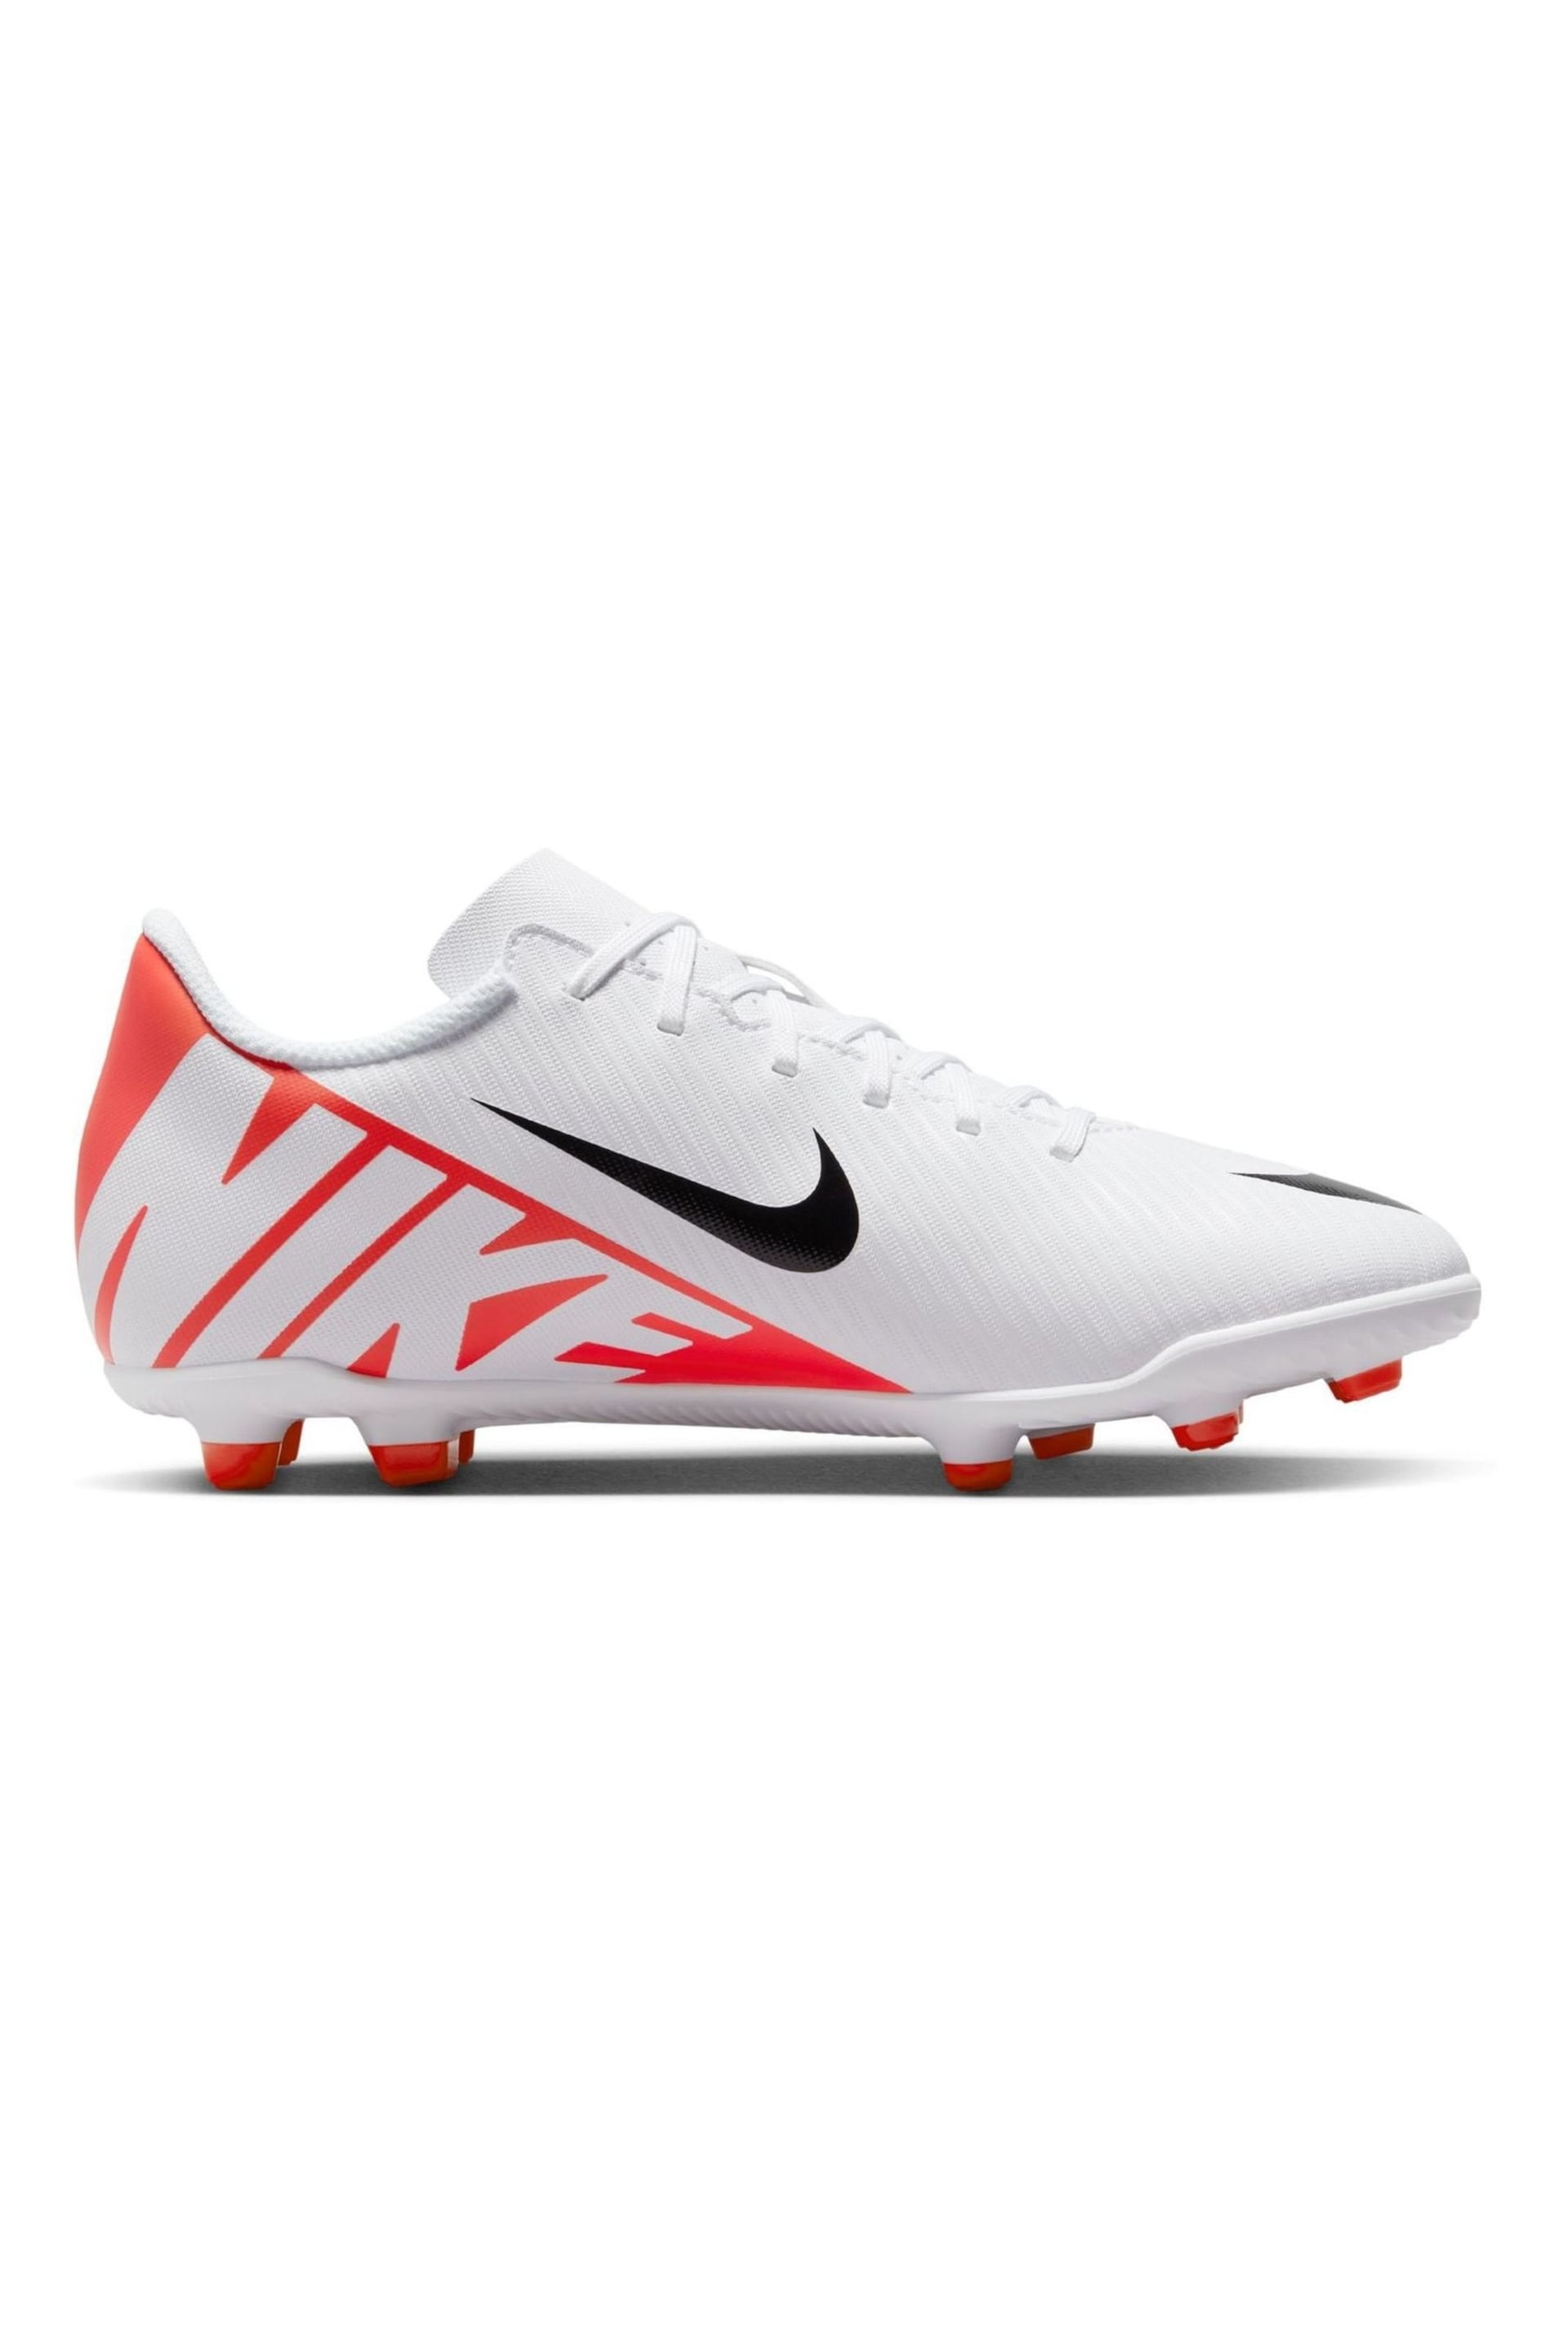 Nike Jr. Red Mercurial Vapor 15 Club Firm Ground Football Boots - Image 2 of 11